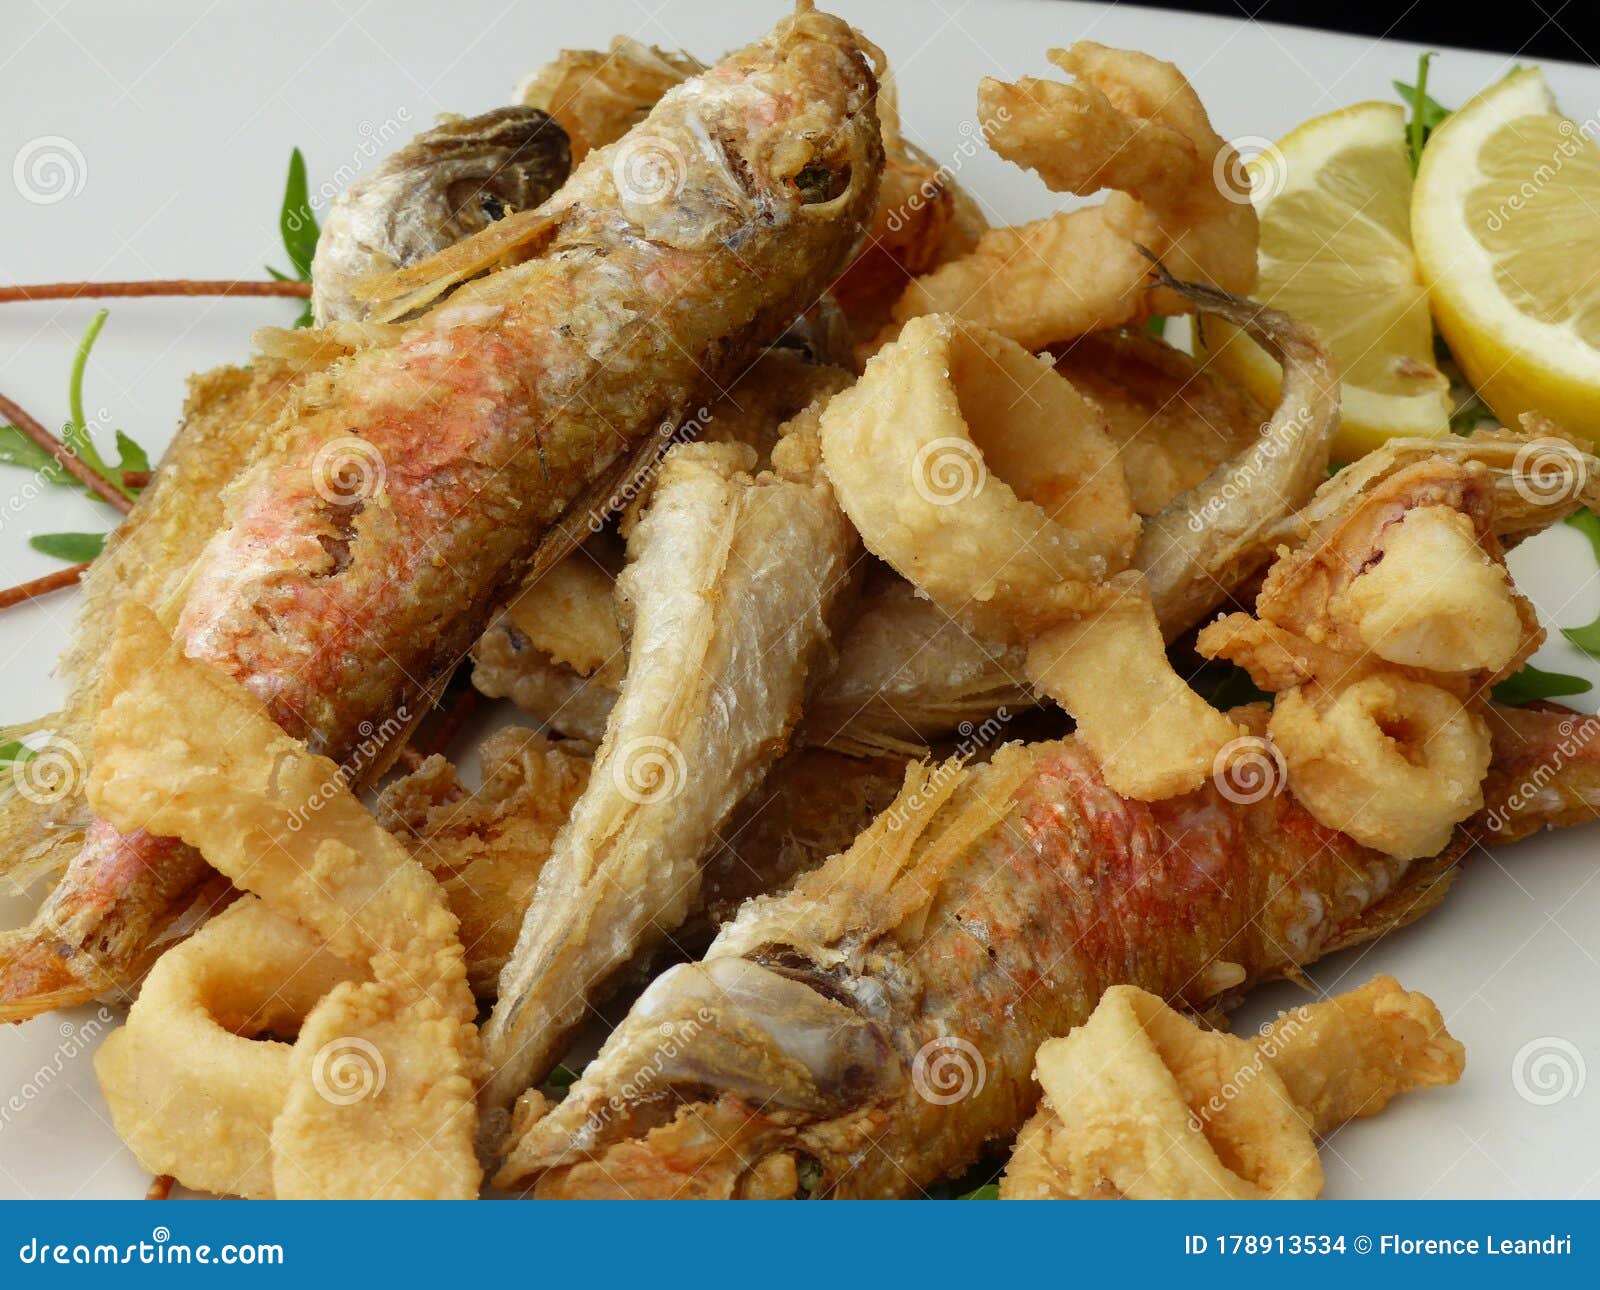 Characteristic Fried Fish Dish In Naples Italy. Stock